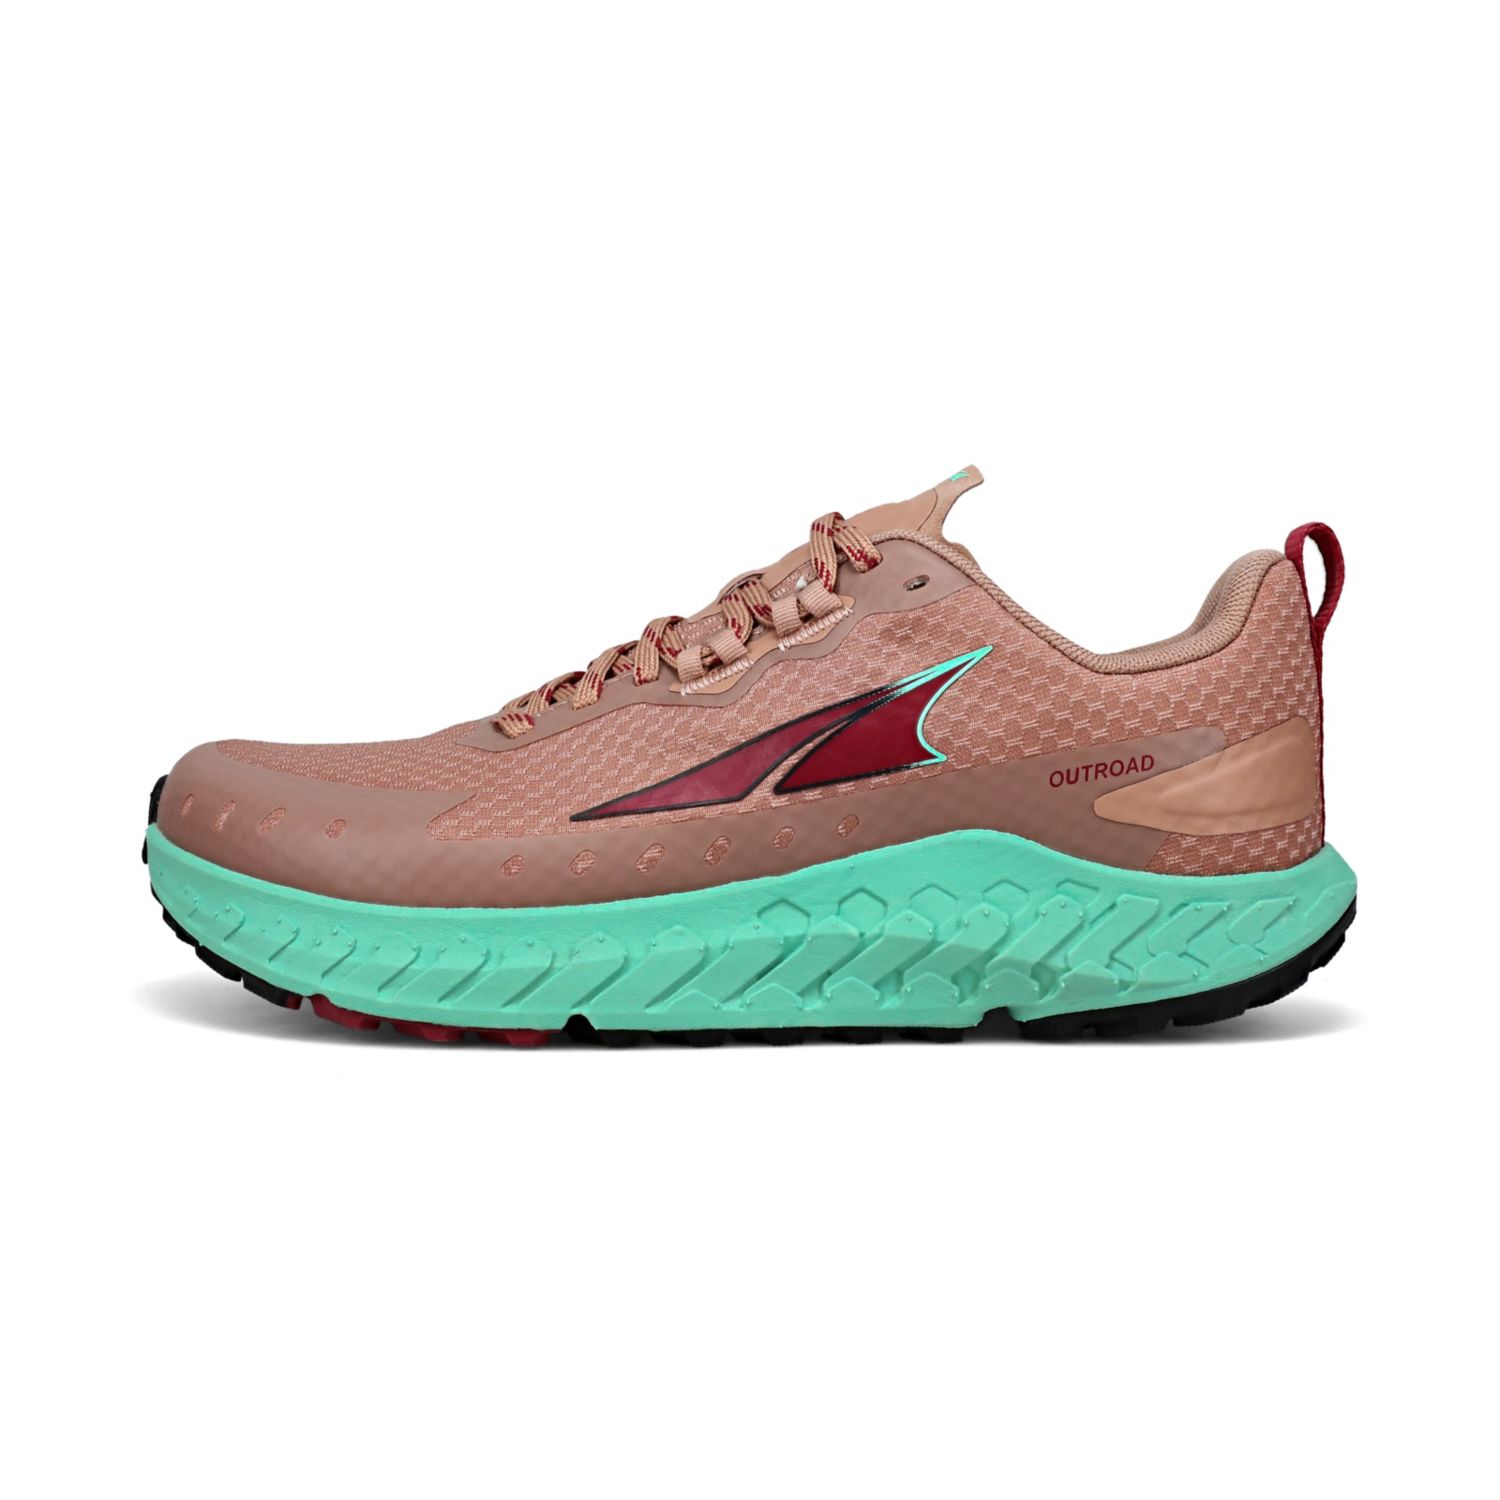 Brown Altra Outroad Women's Trail Running Shoes | Ireland-65893479